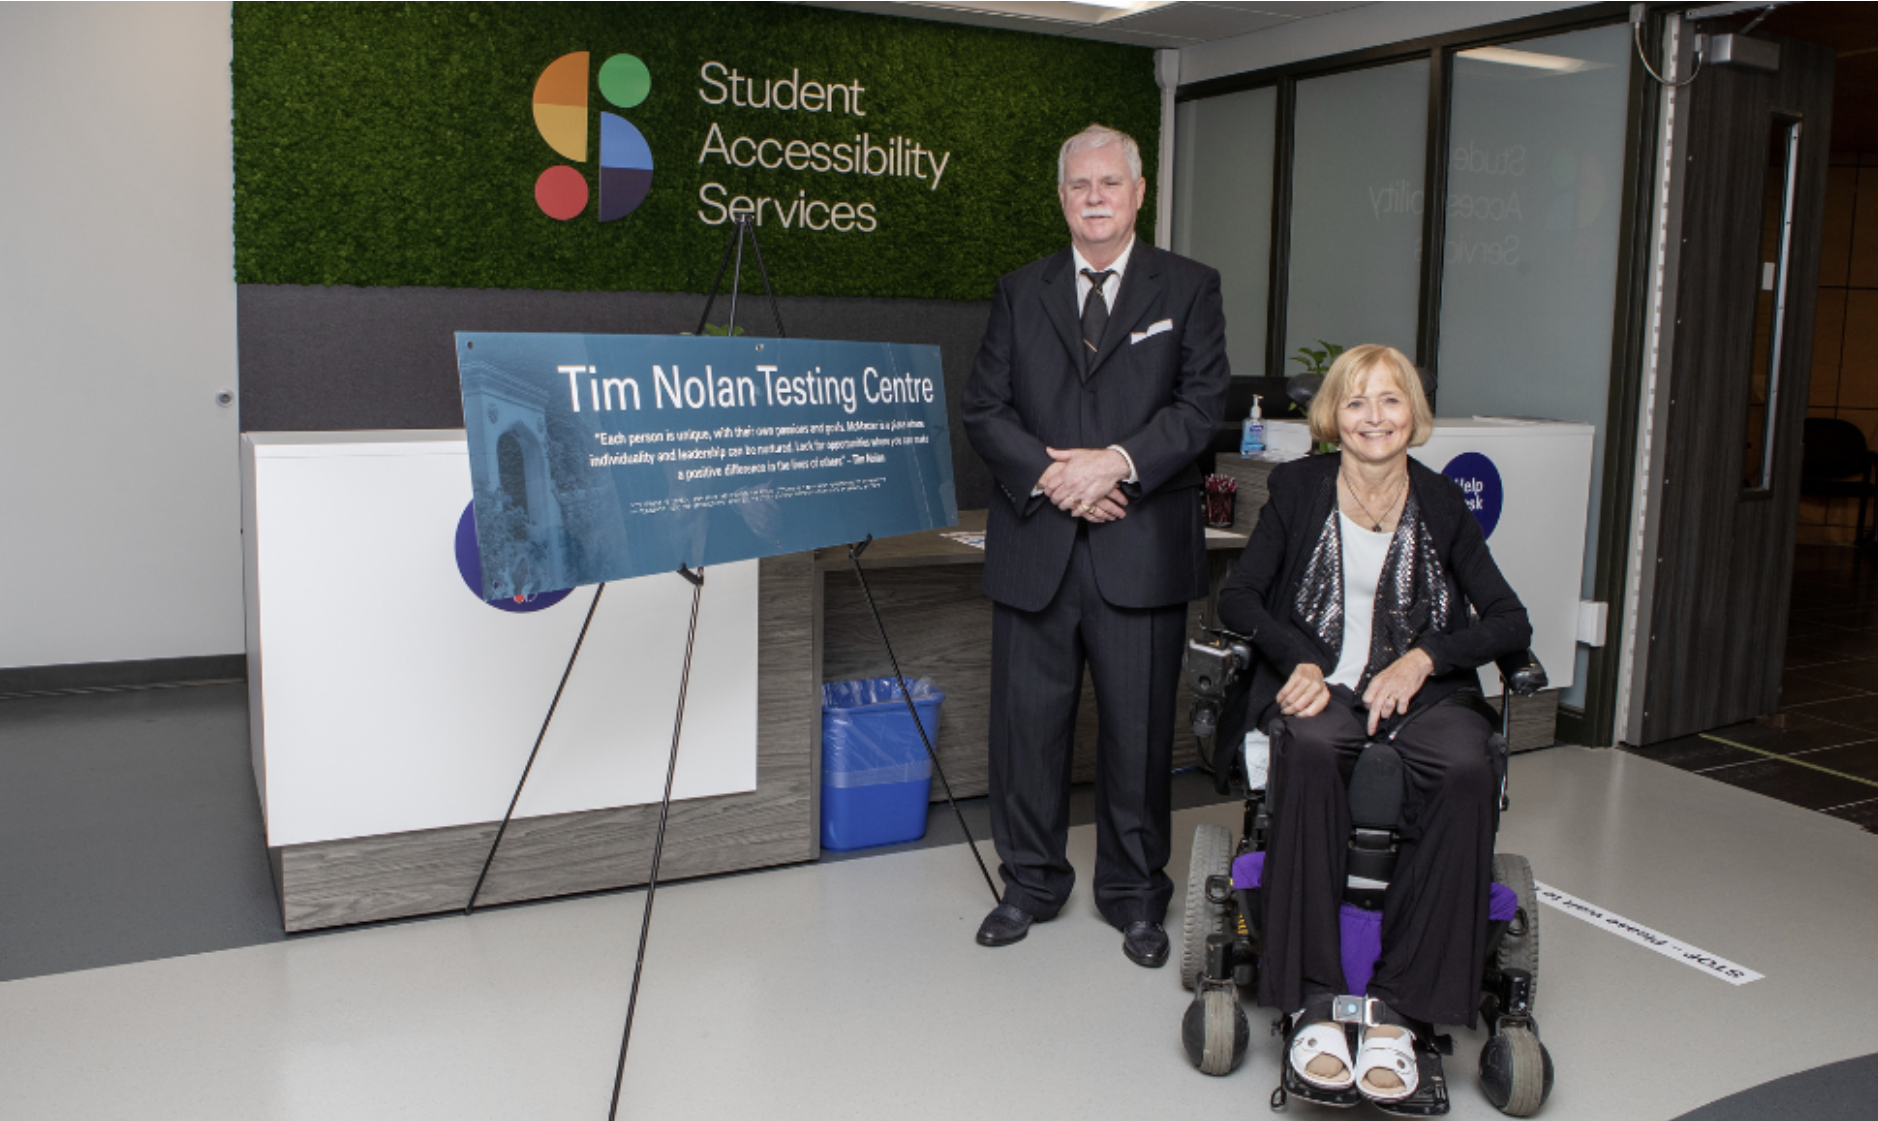 Tim Nolan (left), the former director of Student Accessibility Services (SAS)and Kim Nolan (right), posting out front of the SAS office.